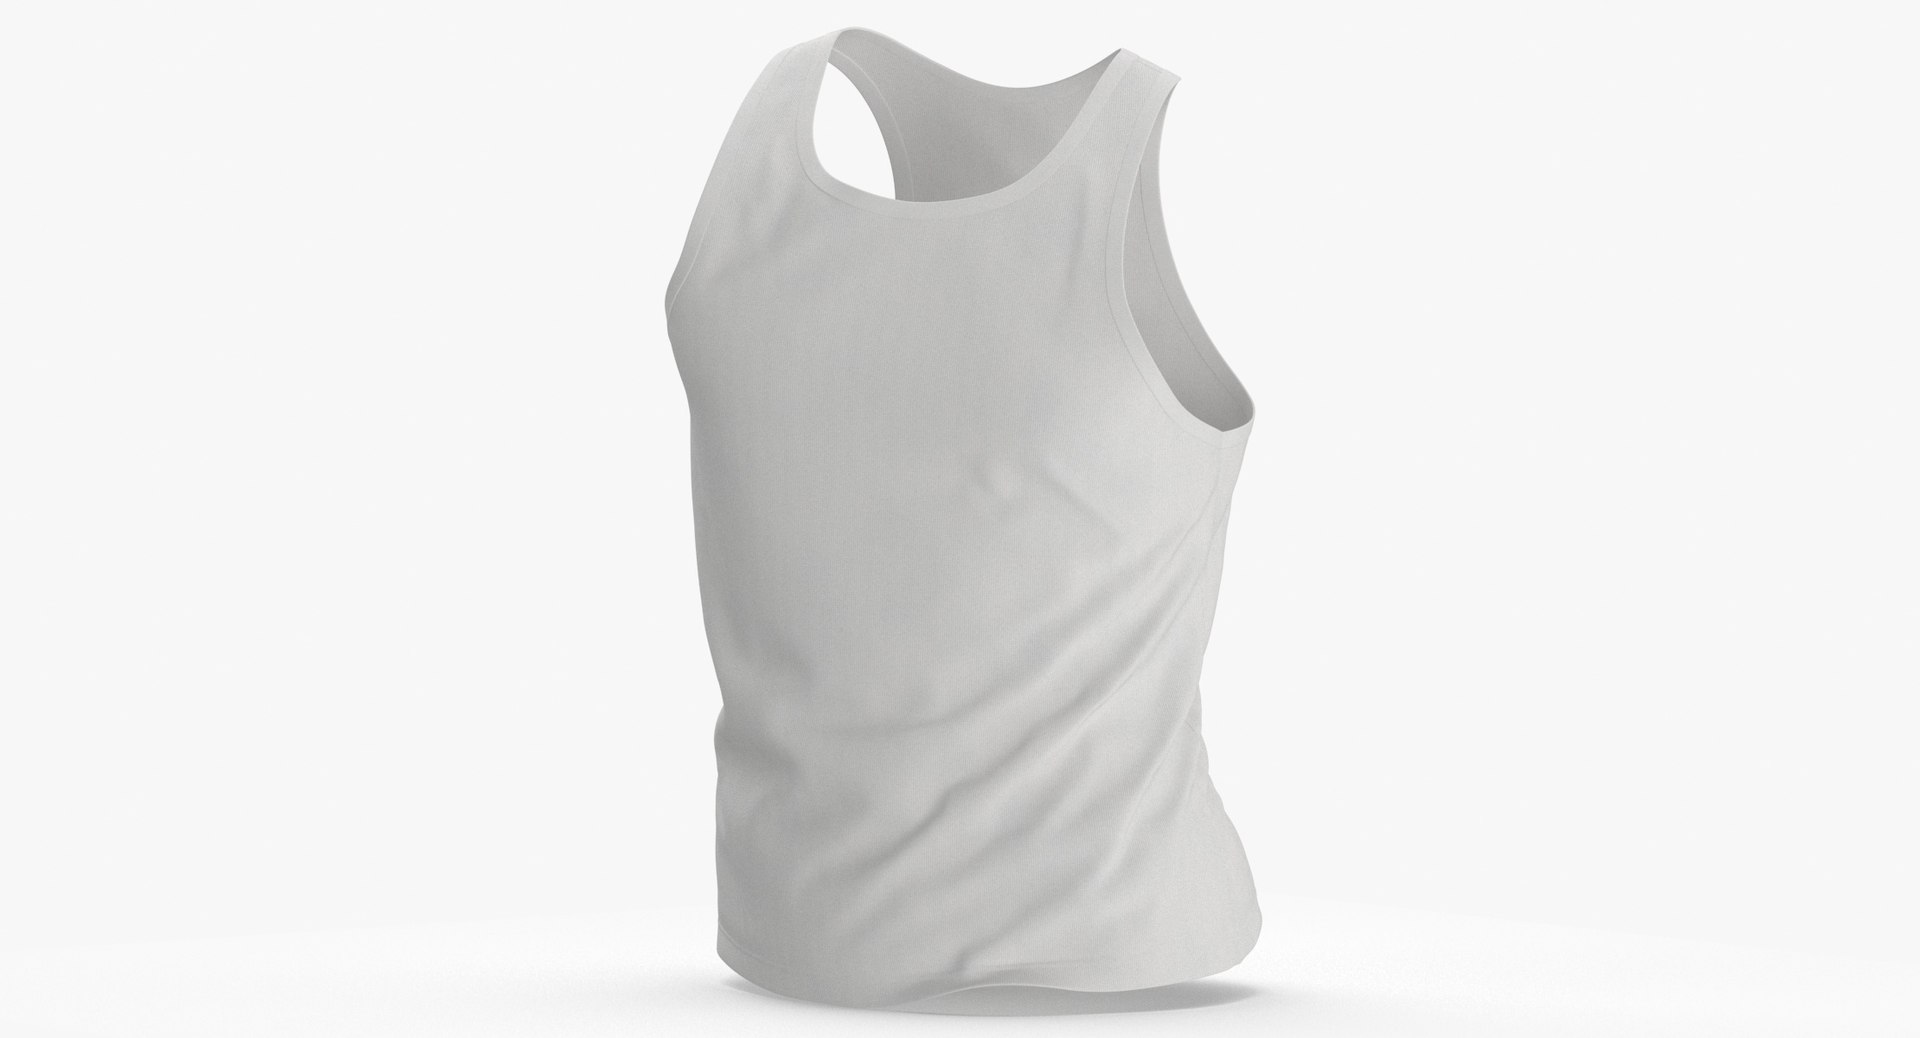 Sleeveless Worn Male Type 02 Pose 01 Blank White And Branded Heather 3D ...